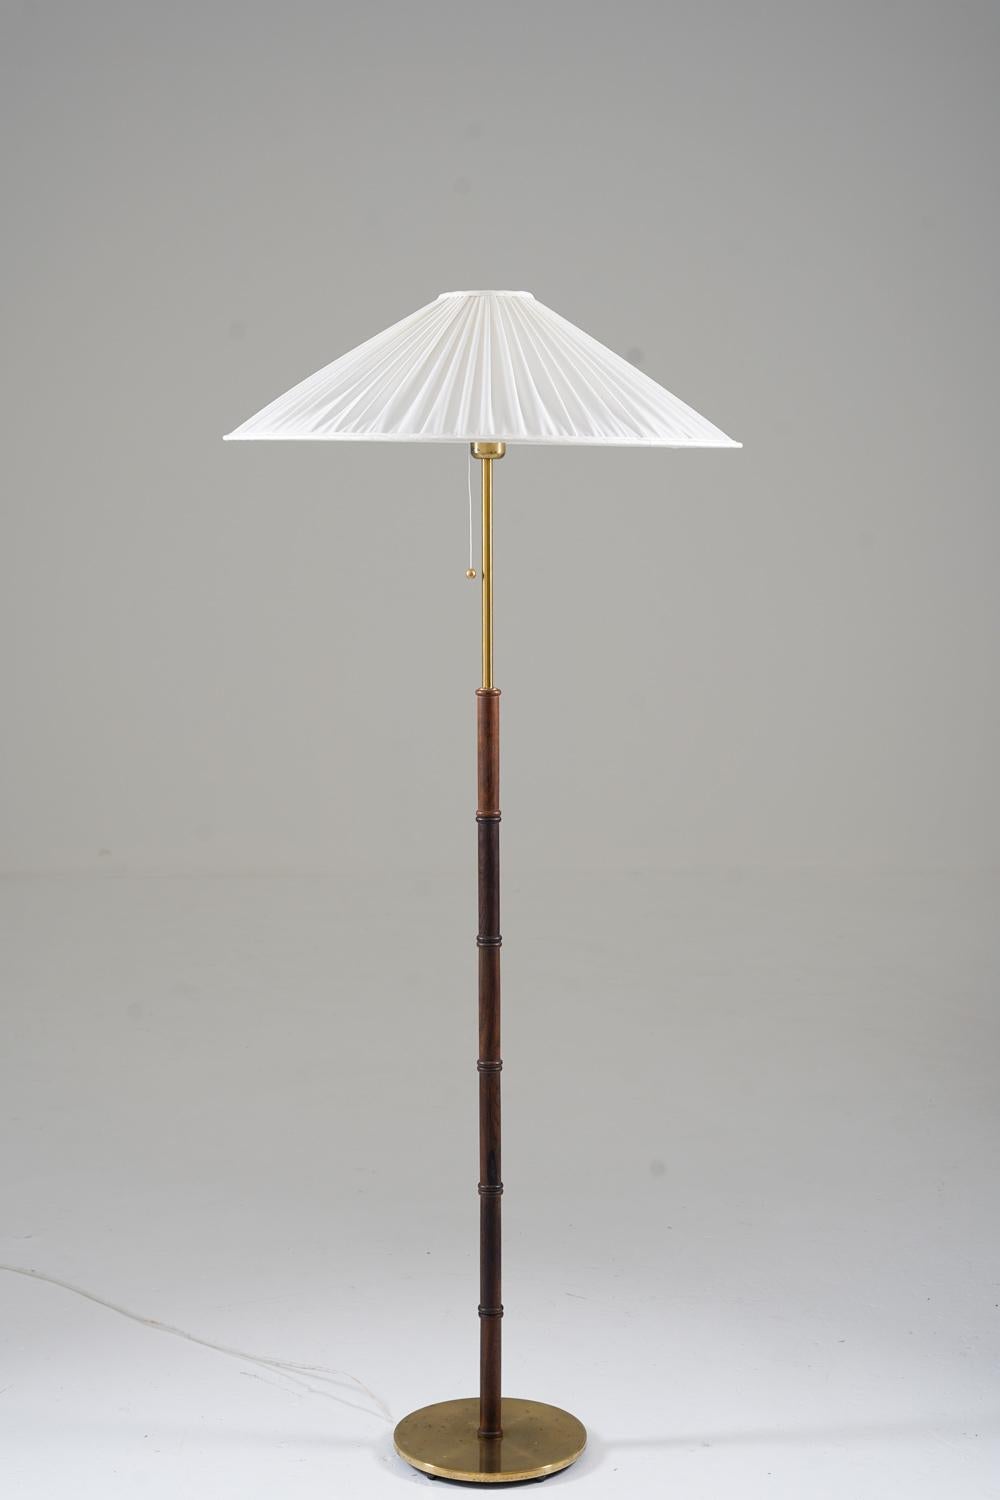 Lovely floor lamp in brass and rosewood by Falkenbergs, Sweden, 1960s.
The design is simple and lets the attention focus on the perfectly harmonizing details of this lamp.

Condition: Good original condition with patina on brass parts (dents,